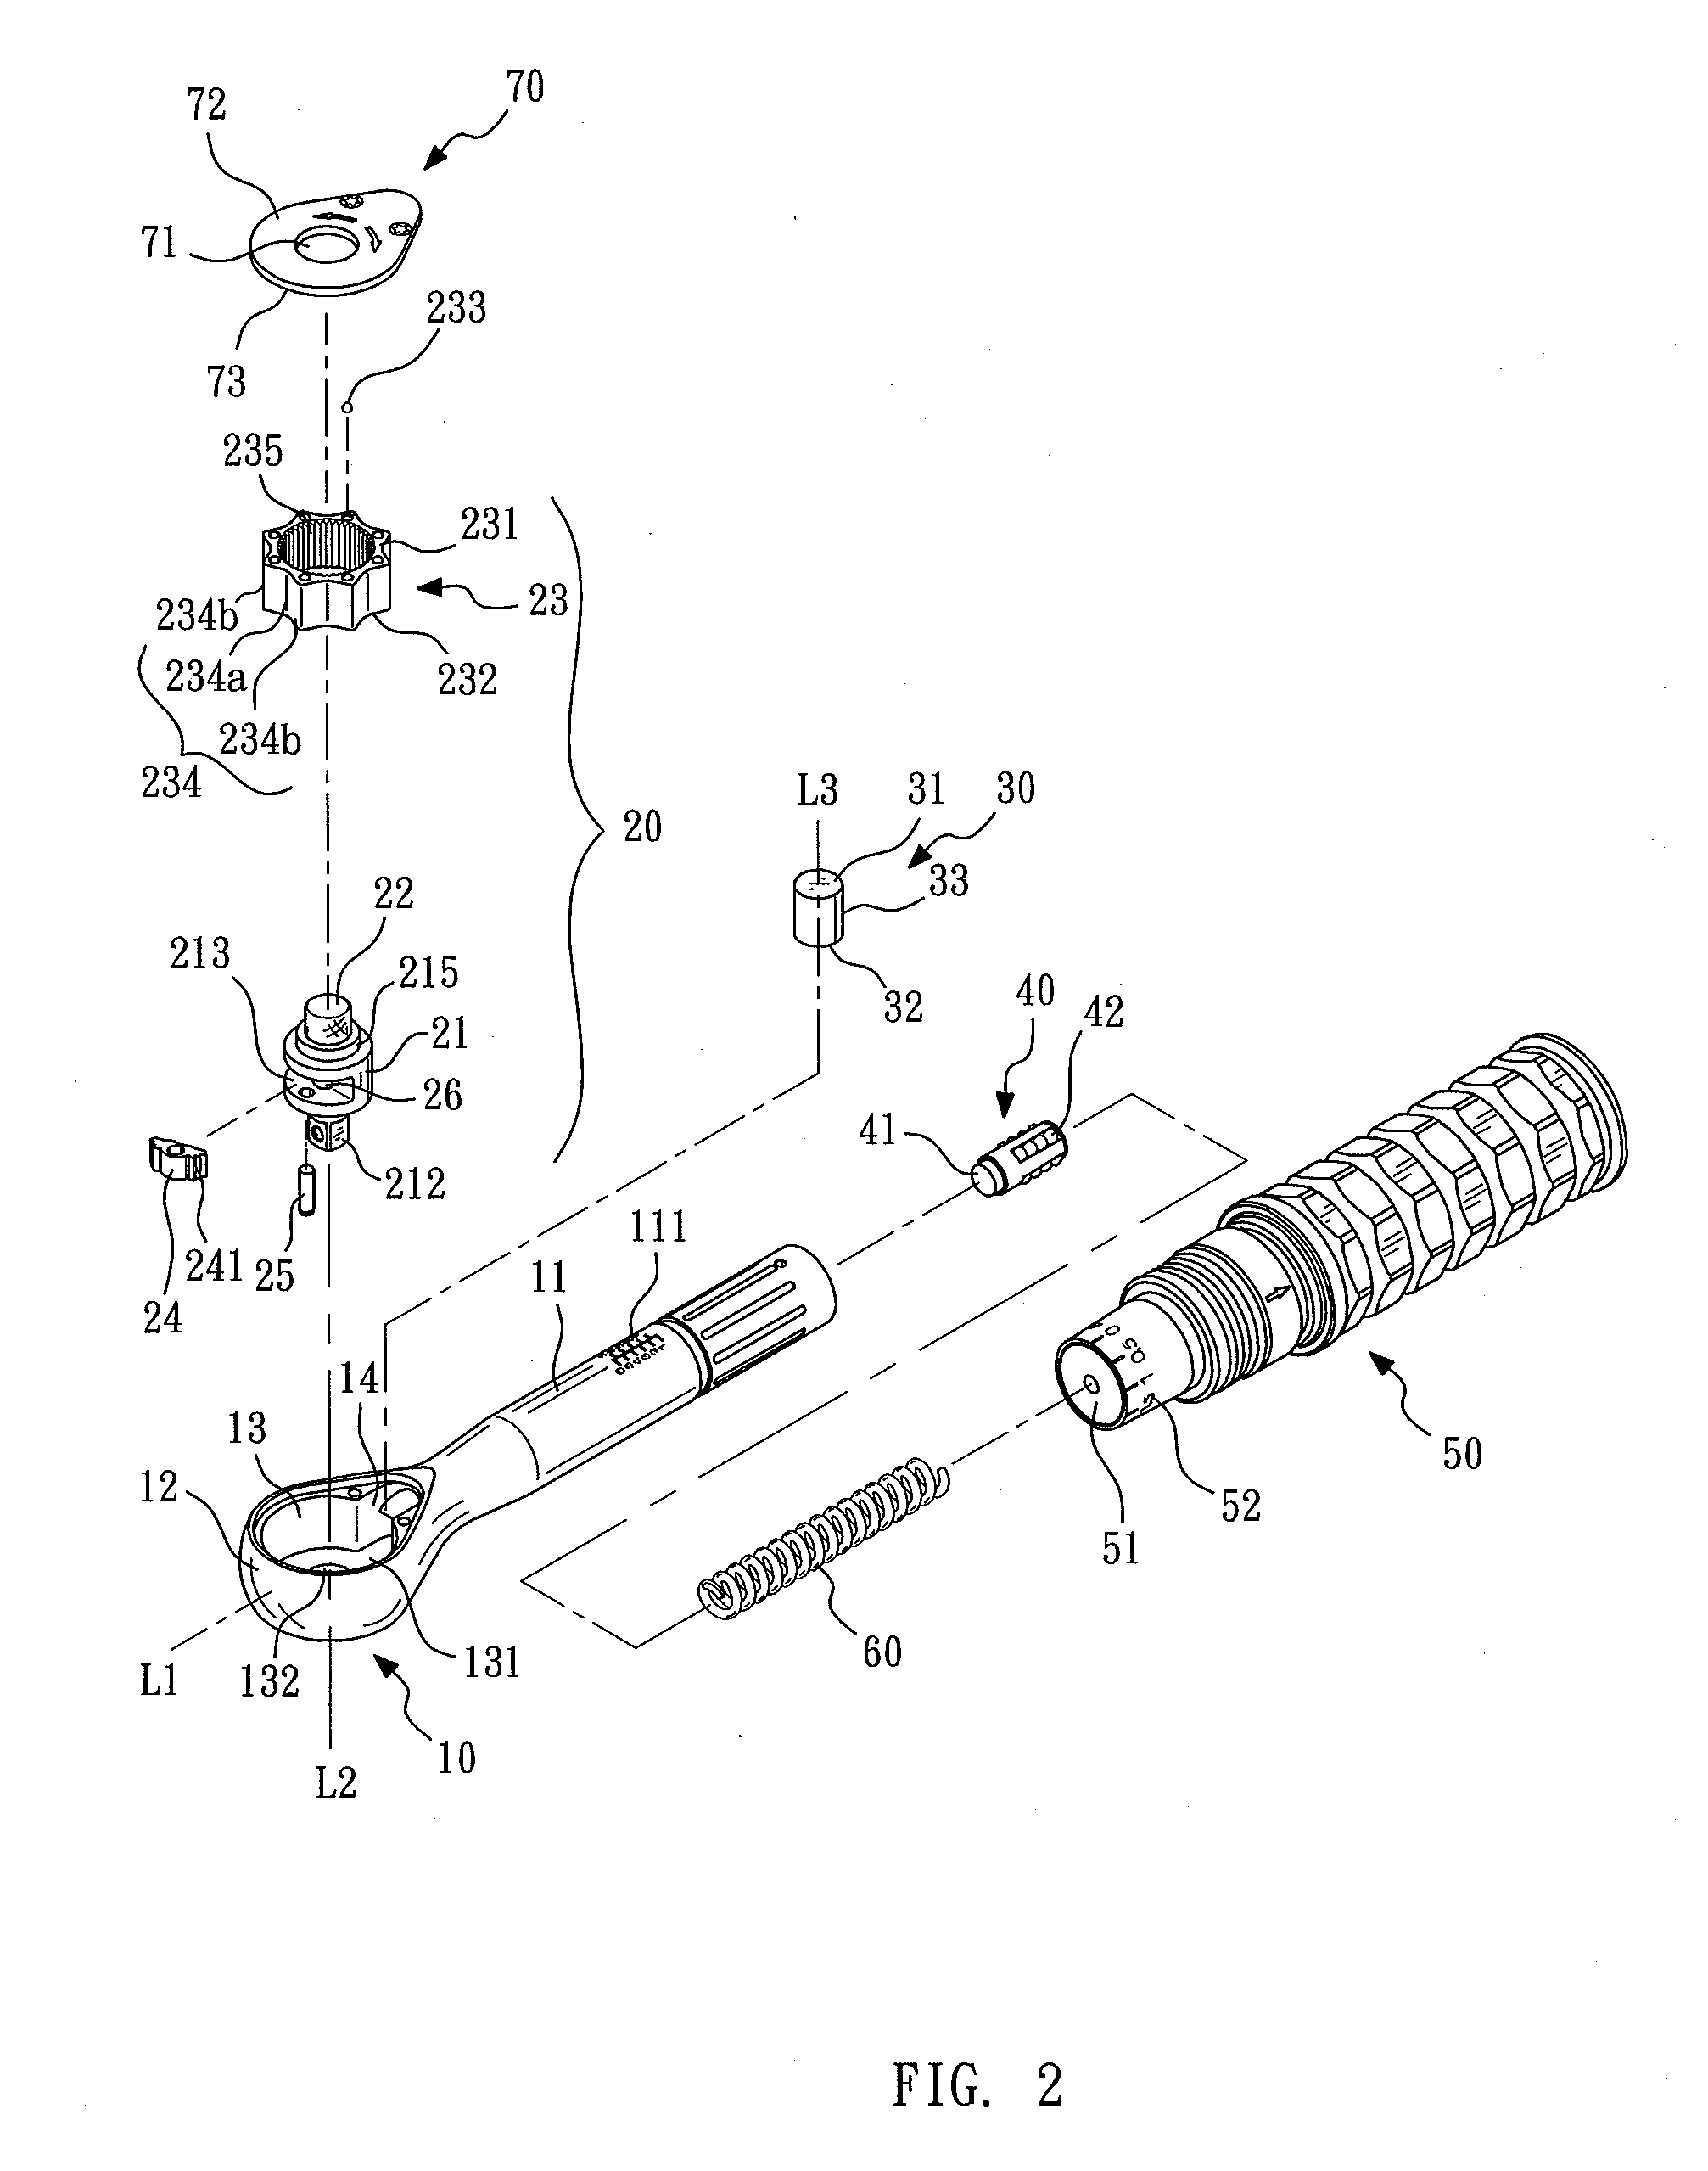 Torque wrench with constant torque